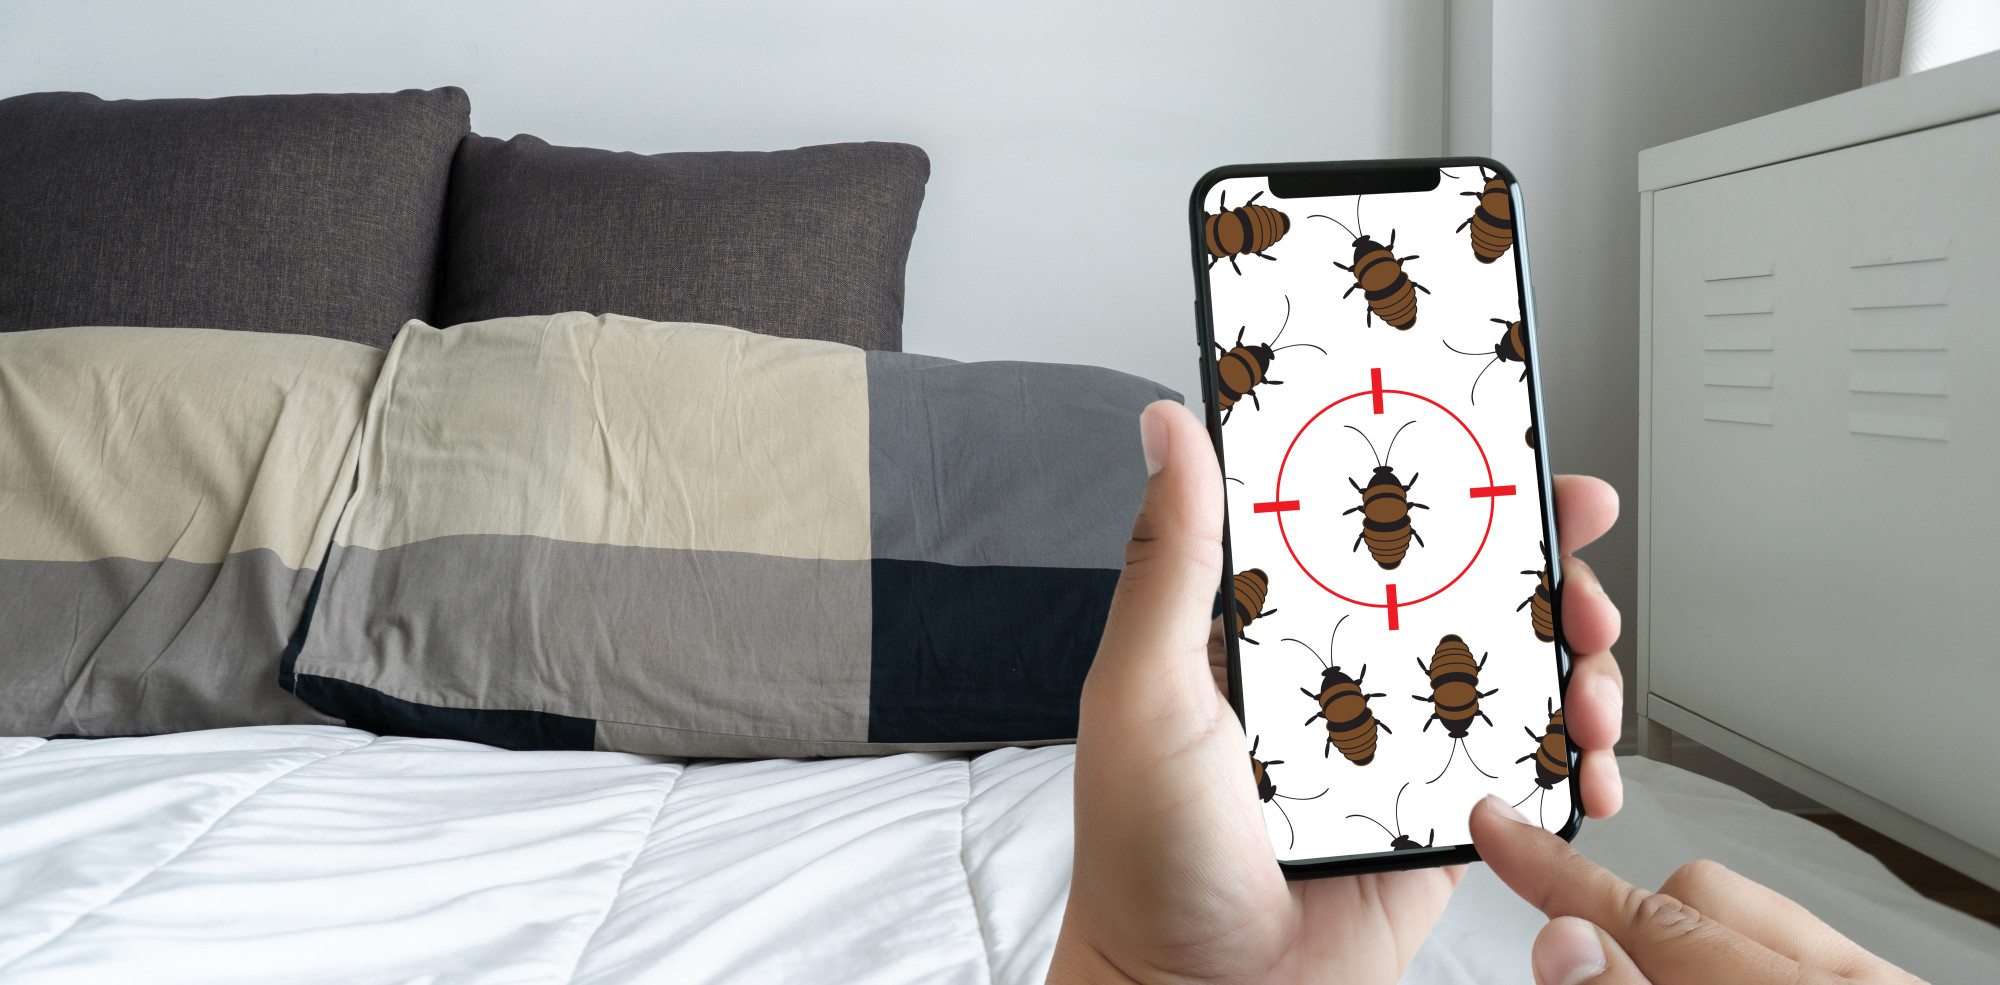 Are you wondering how to keep bed bugs from visiting your home? Click here for five practical tips for preventing bed bugs.